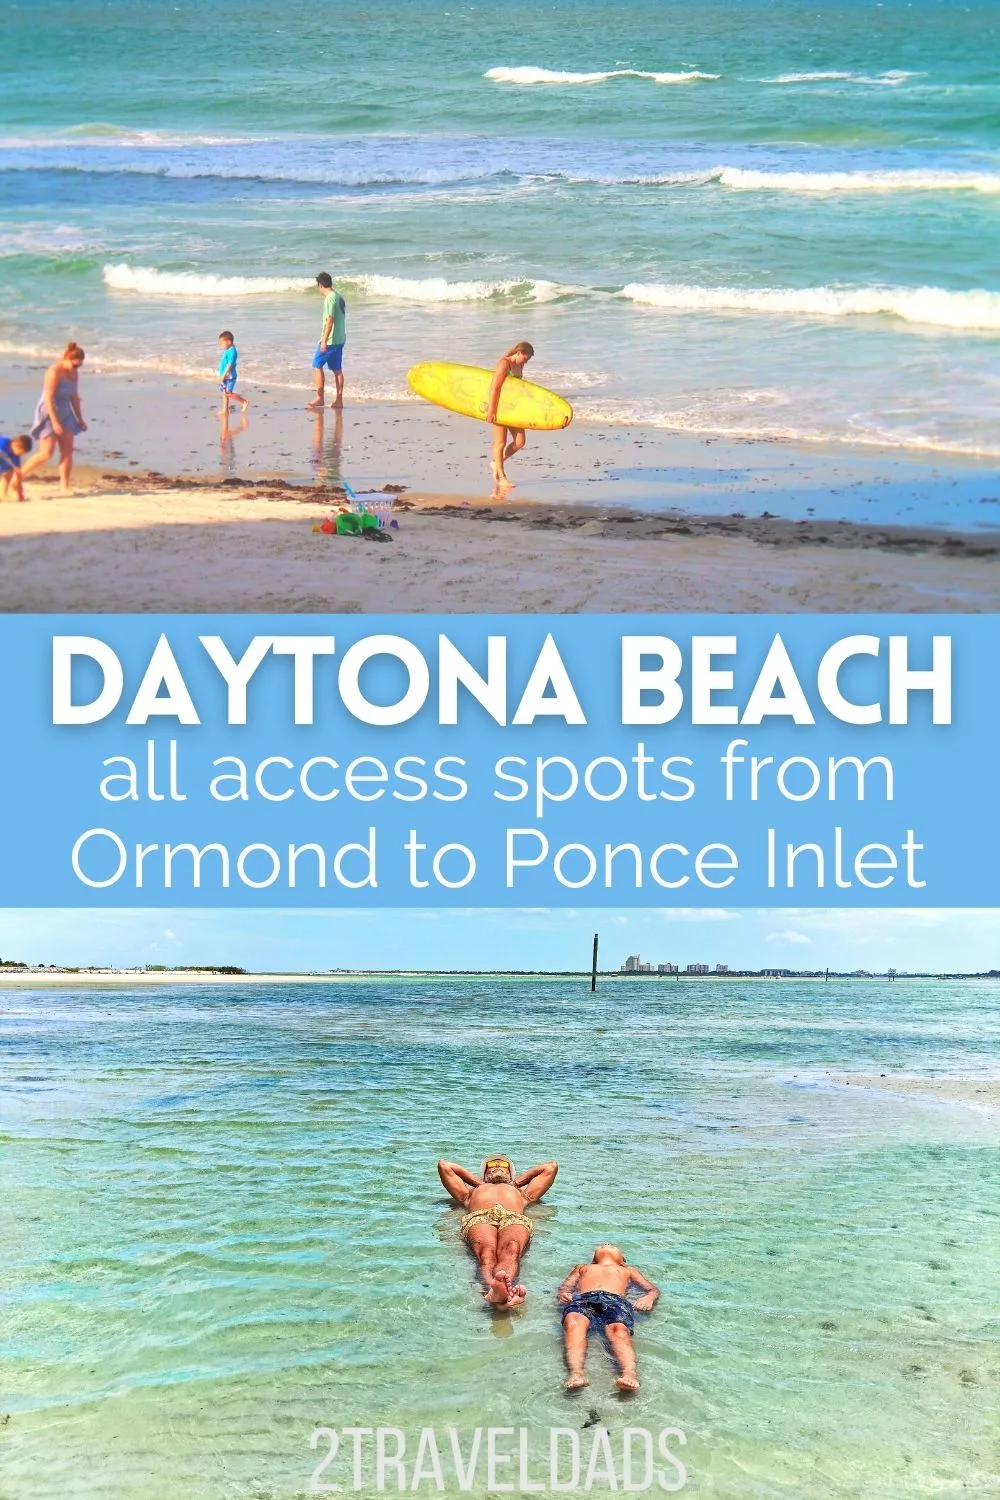 Where can you get onto the beach in Daytona easily? List of beach access points, parking areas and beach boardwalks in Daytona, Volusia County, Florida.